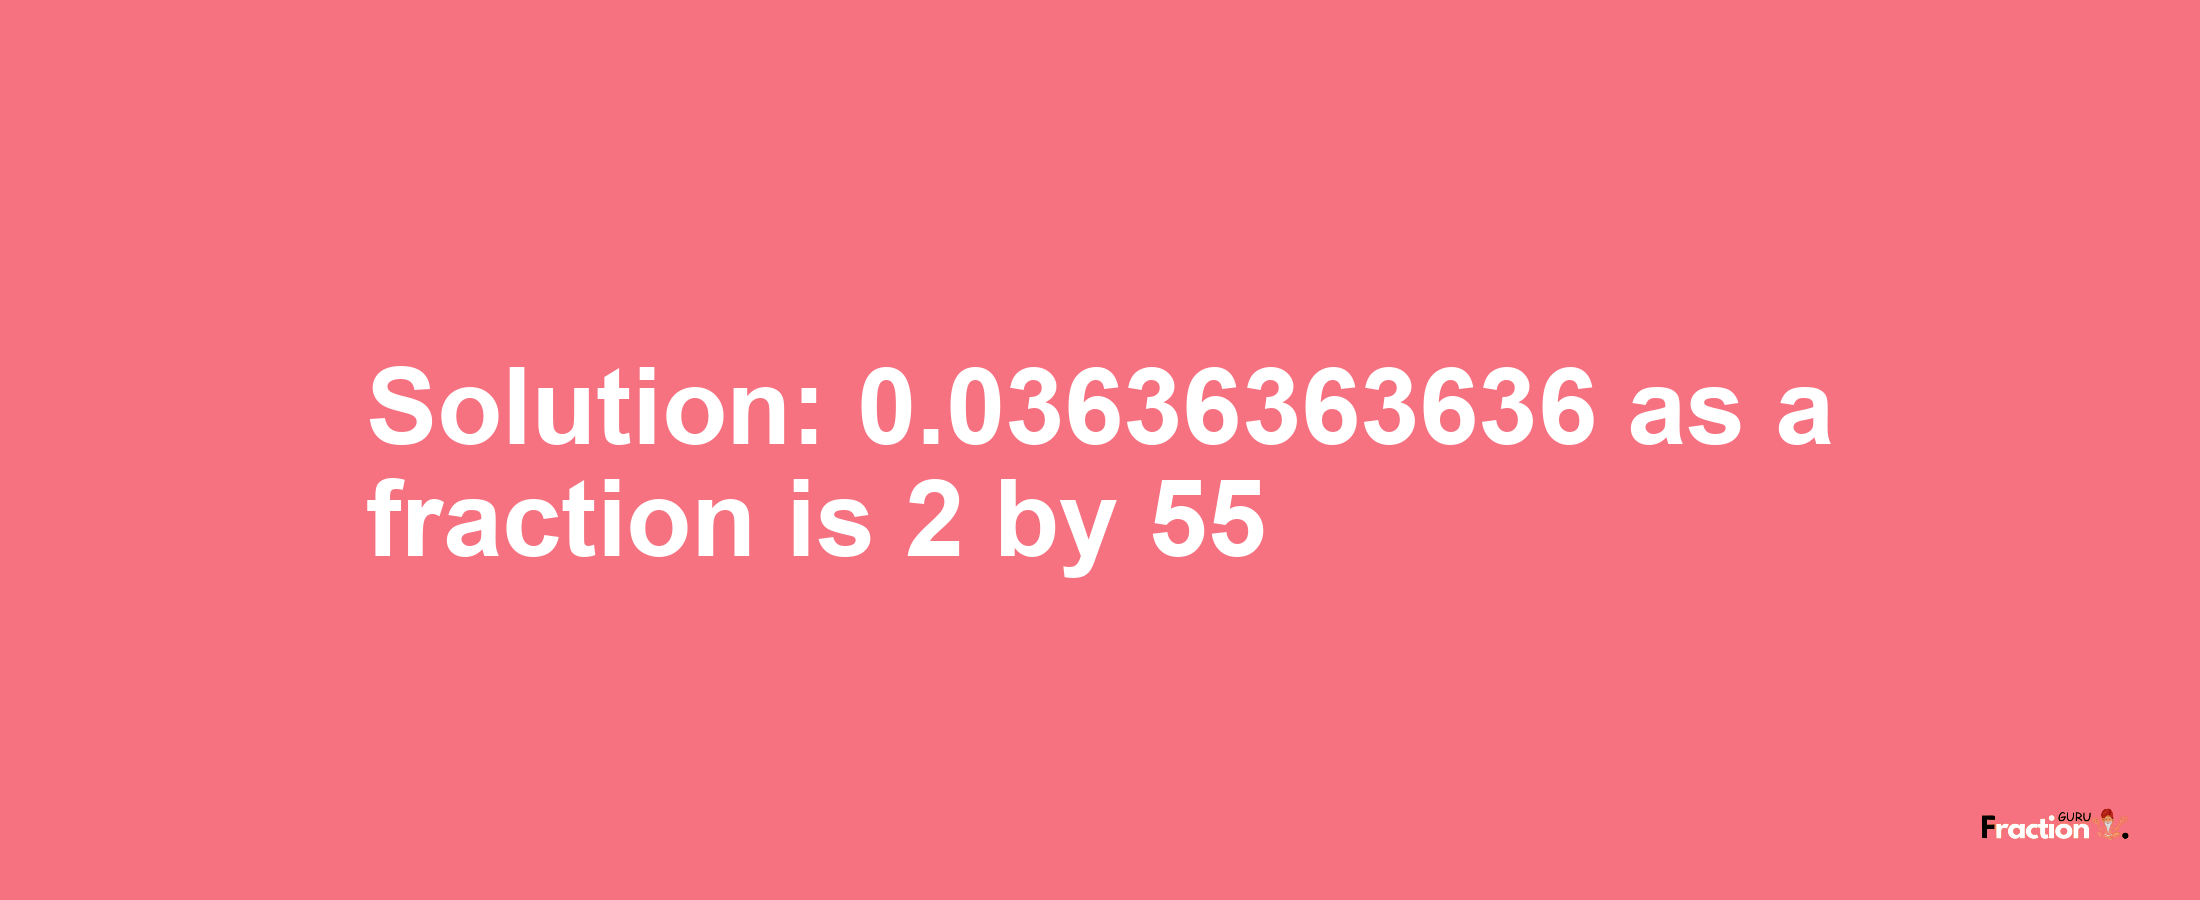 Solution:0.03636363636 as a fraction is 2/55